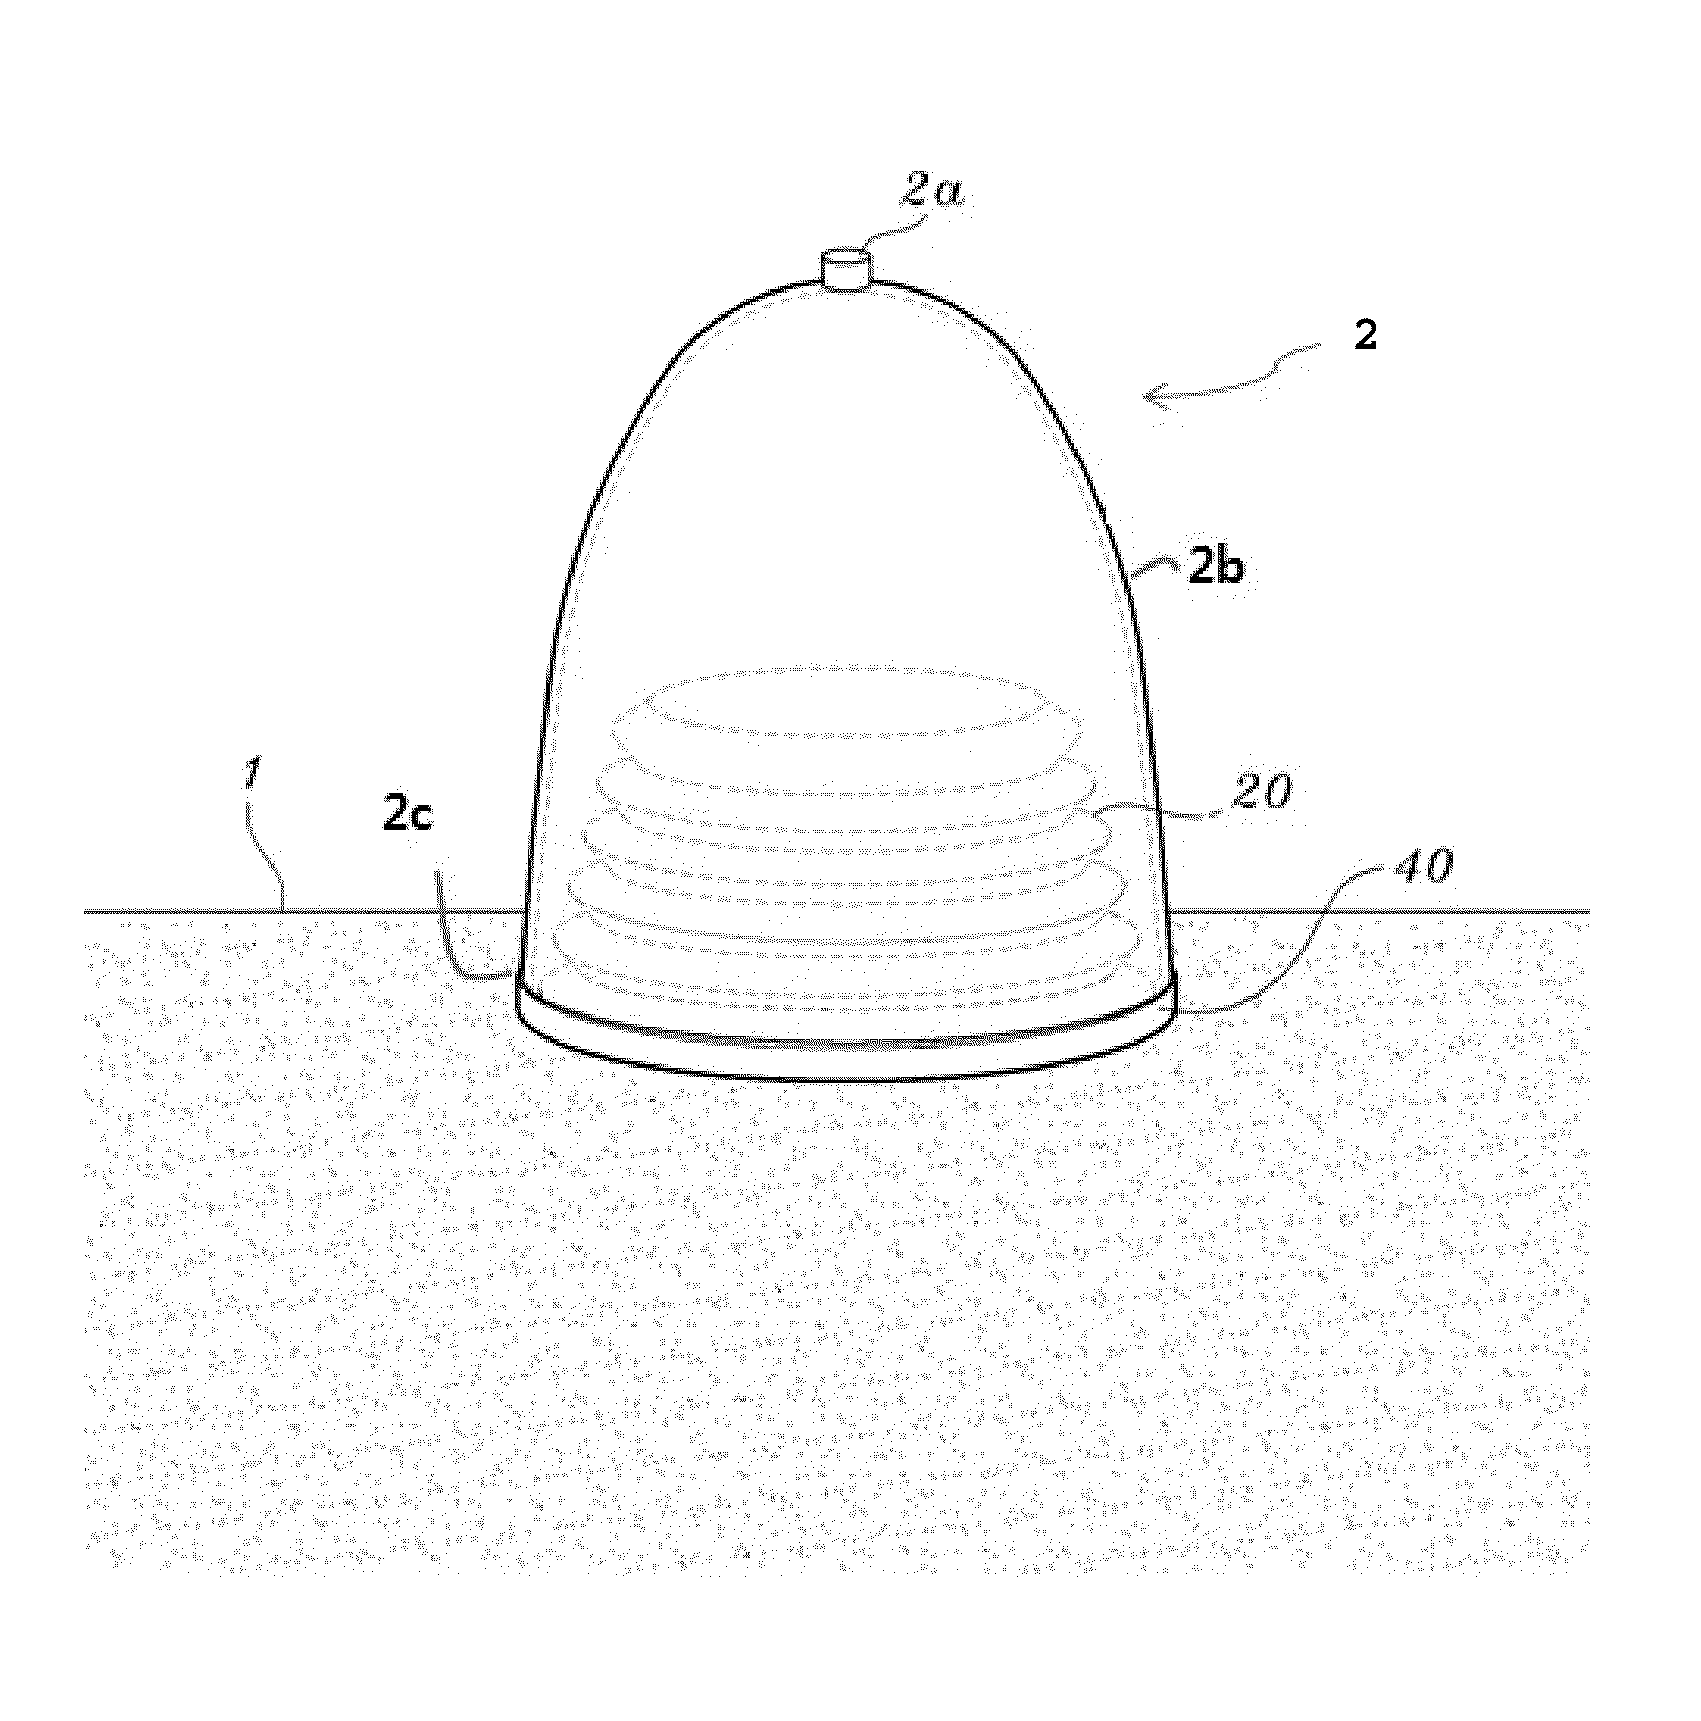 Disposable sterilized cupping therapy apparatus